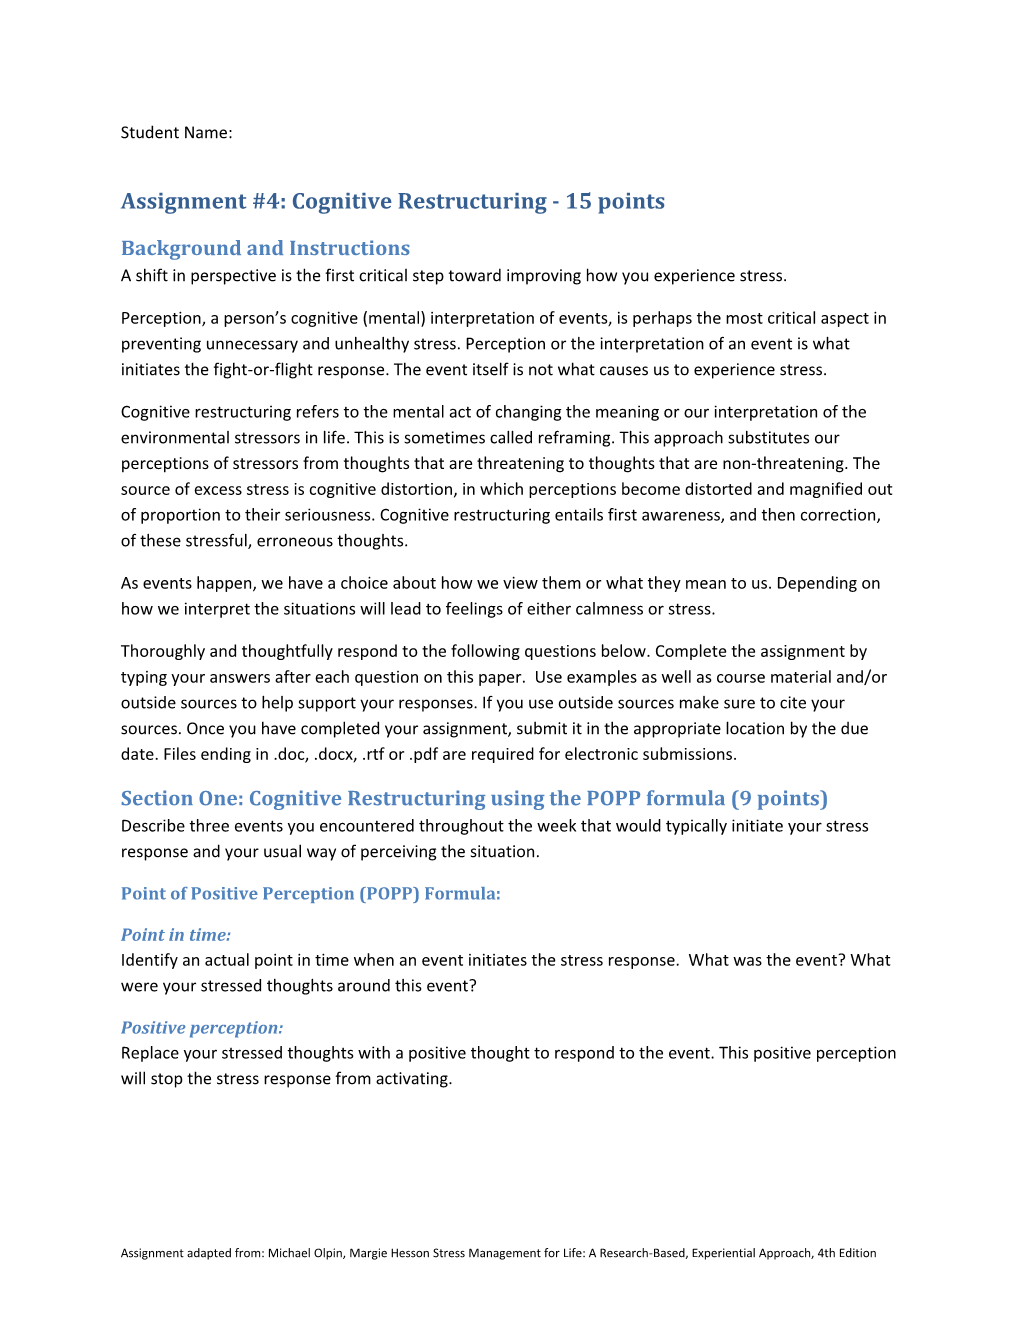 Assignment #4:Cognitive Restructuring -15 Points